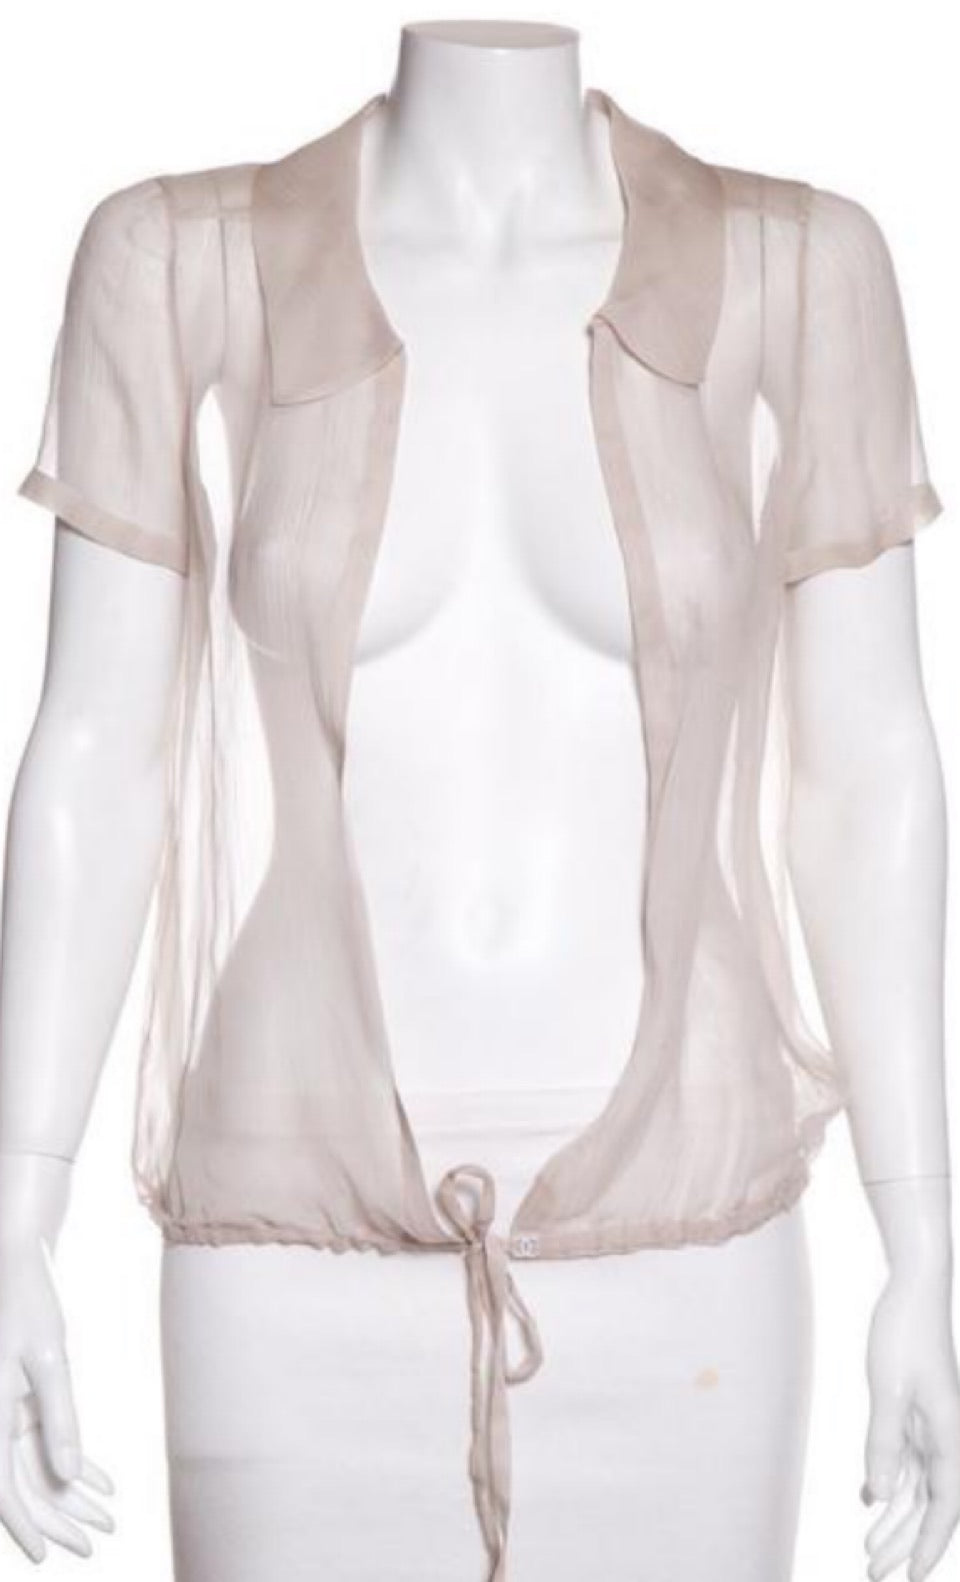 HelensChanel Vintage Chanel 02A, 2002 Fall Silk with Pearl Trim CC Logo Camisole Blouse Top FR 40